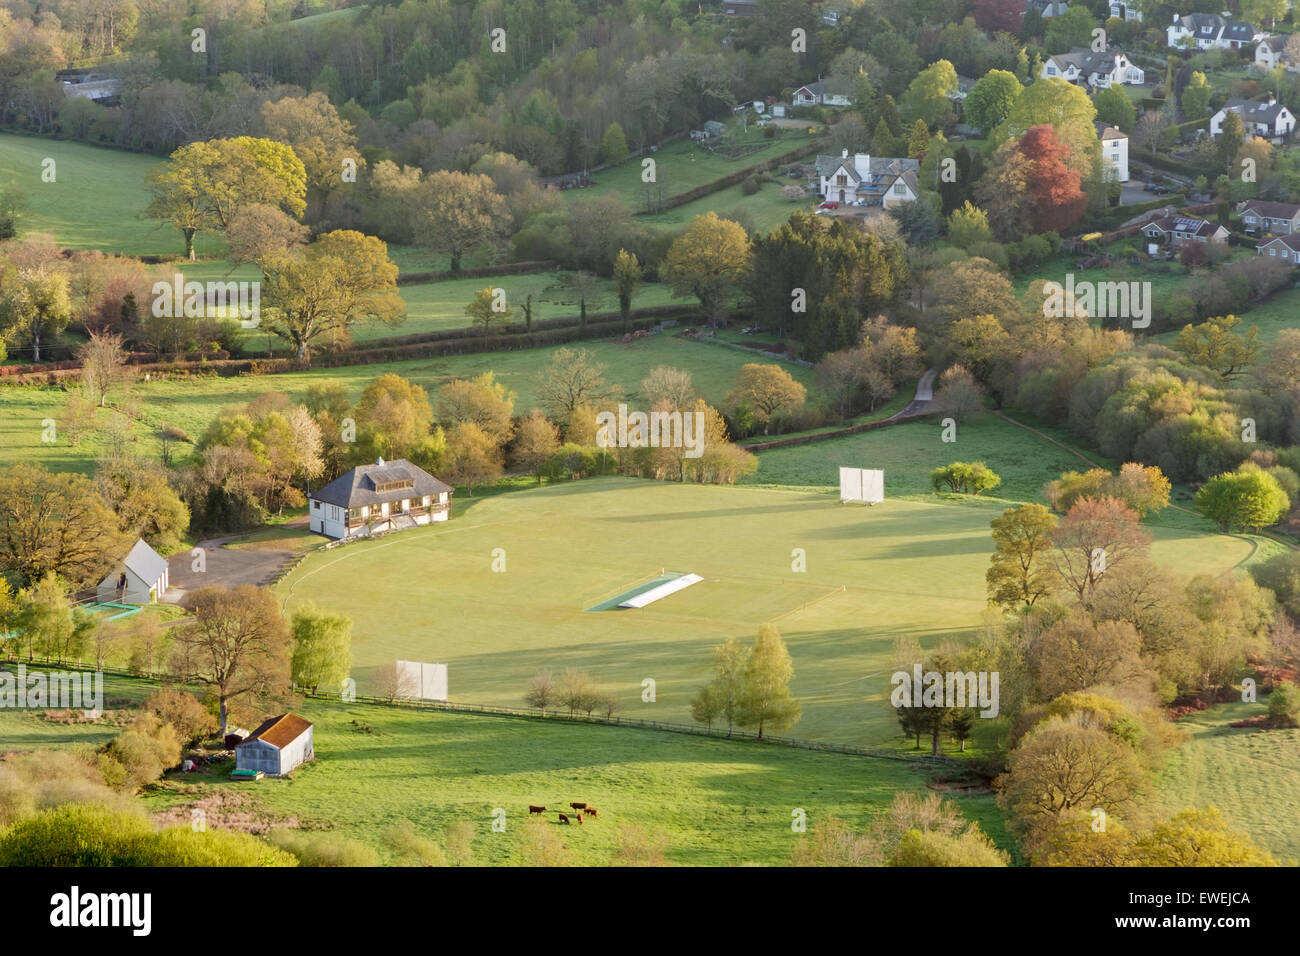 The early morning sun splashes Chagford cricket ground with some warm light. Stock Photo